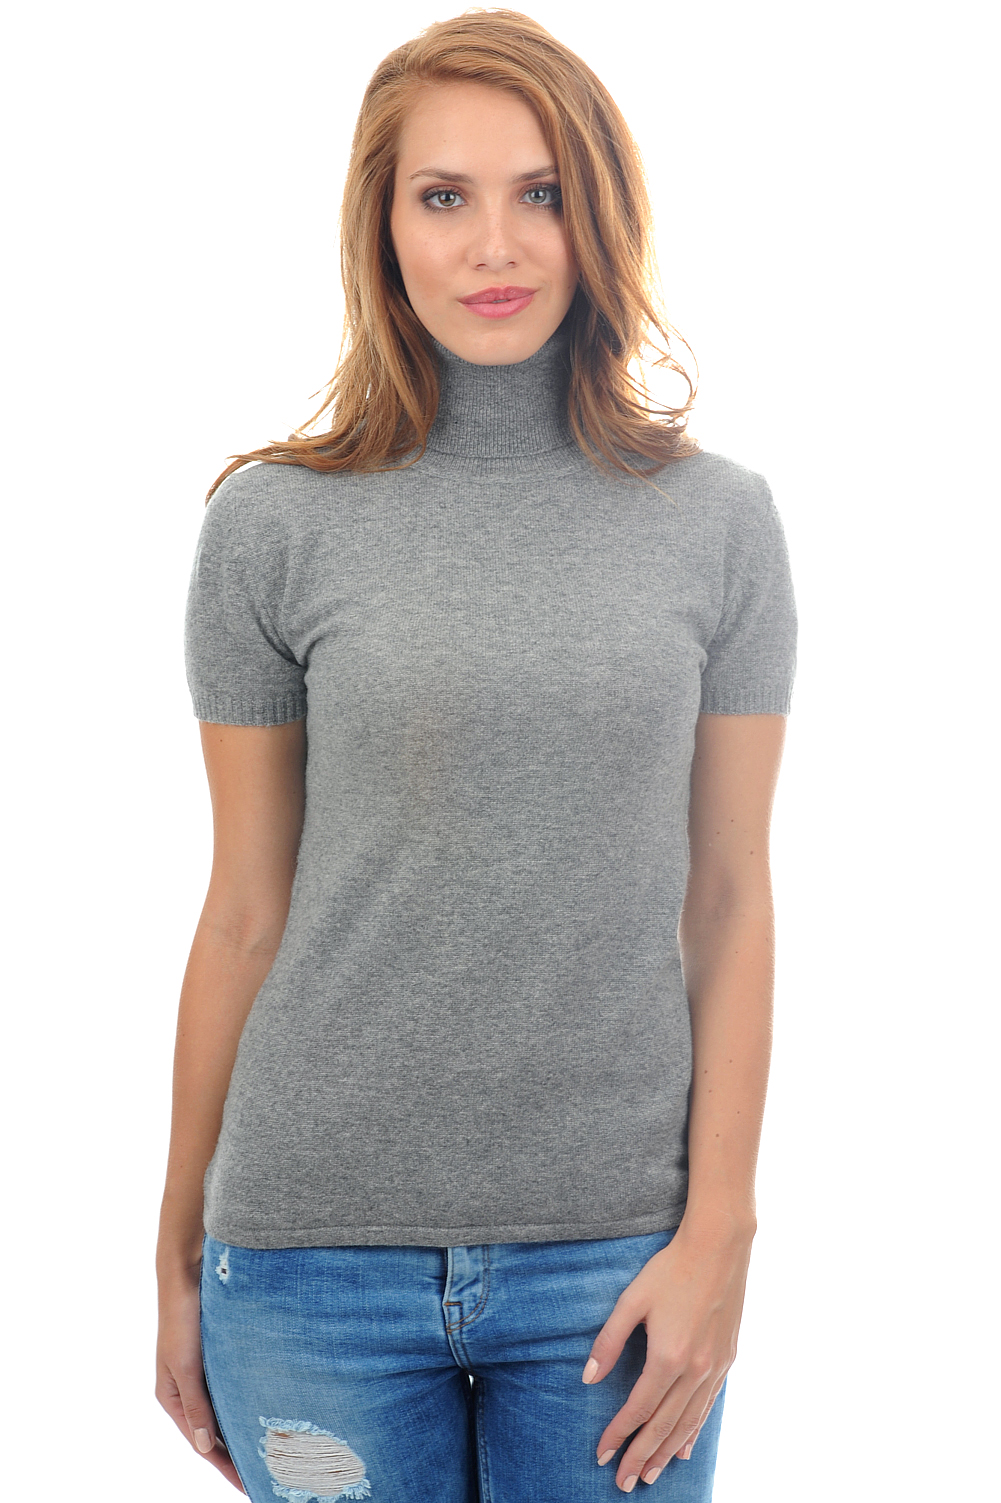 Cashmere ladies spring summer collection olivia grey marl 3xl